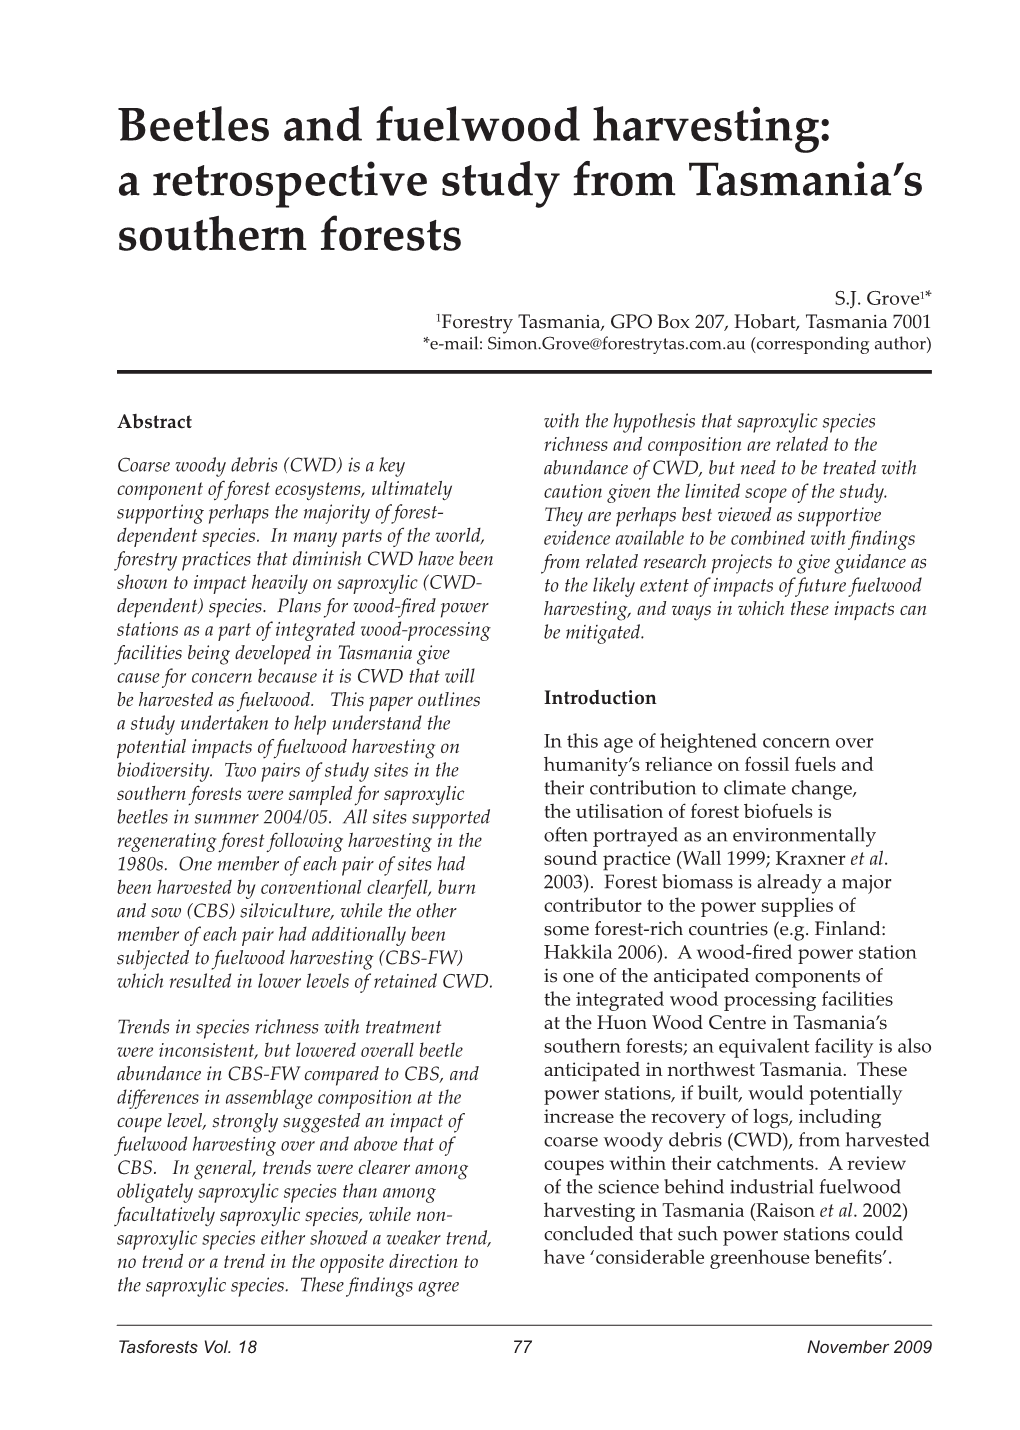 Beetles and Fuelwood Harvesting: a Retrospective Study from Tasmania’S Southern Forests